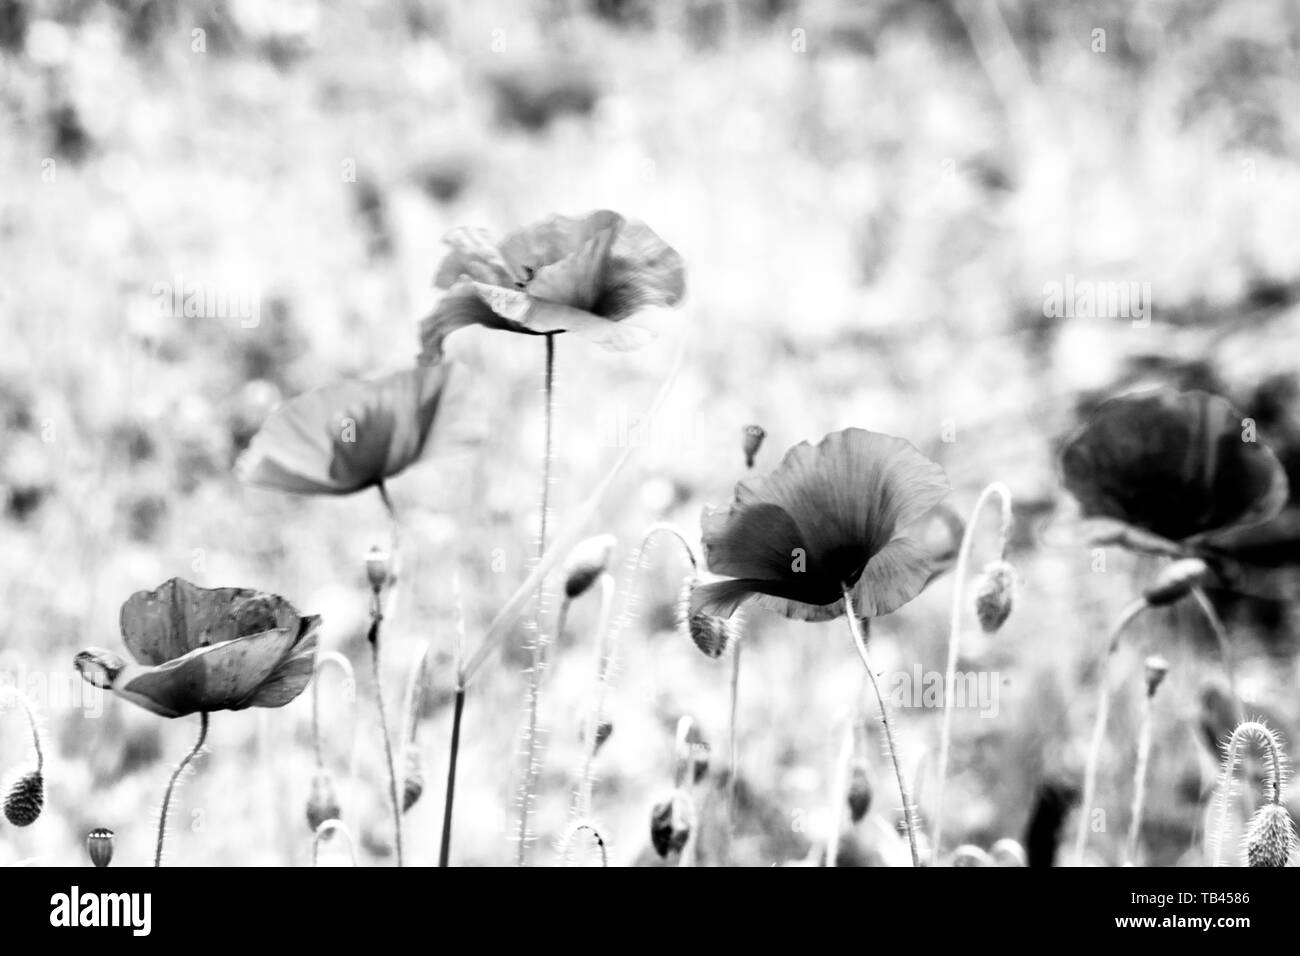 Abstract view of poppies Stock Photo